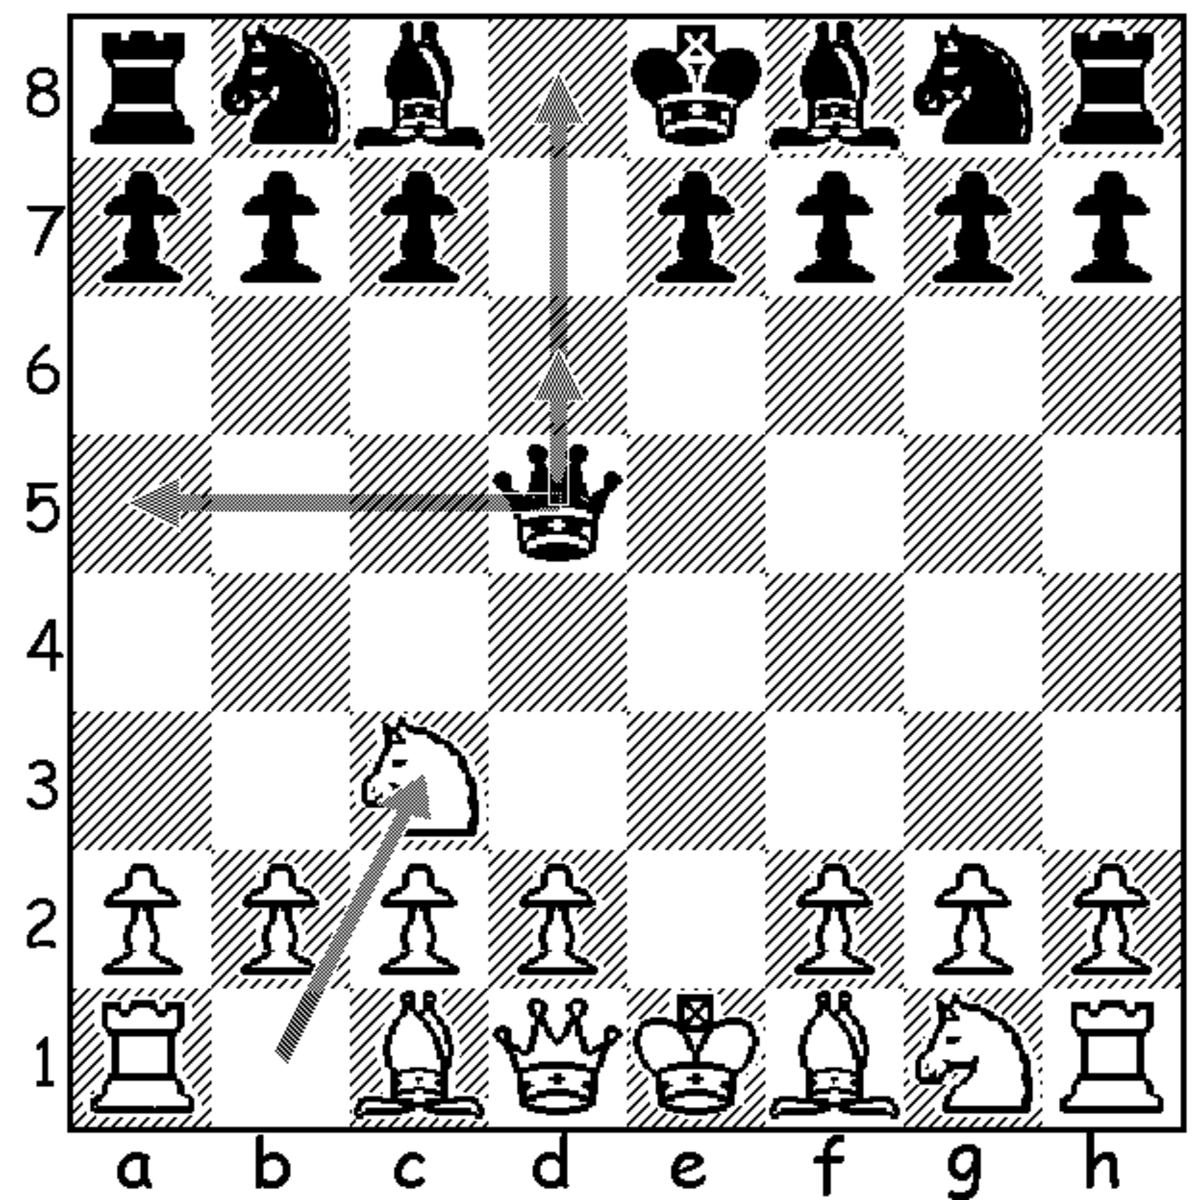 chess-openings-a-simple-and-complete-repertoire-for-white-against-the-scandinavian-center-counter-defense